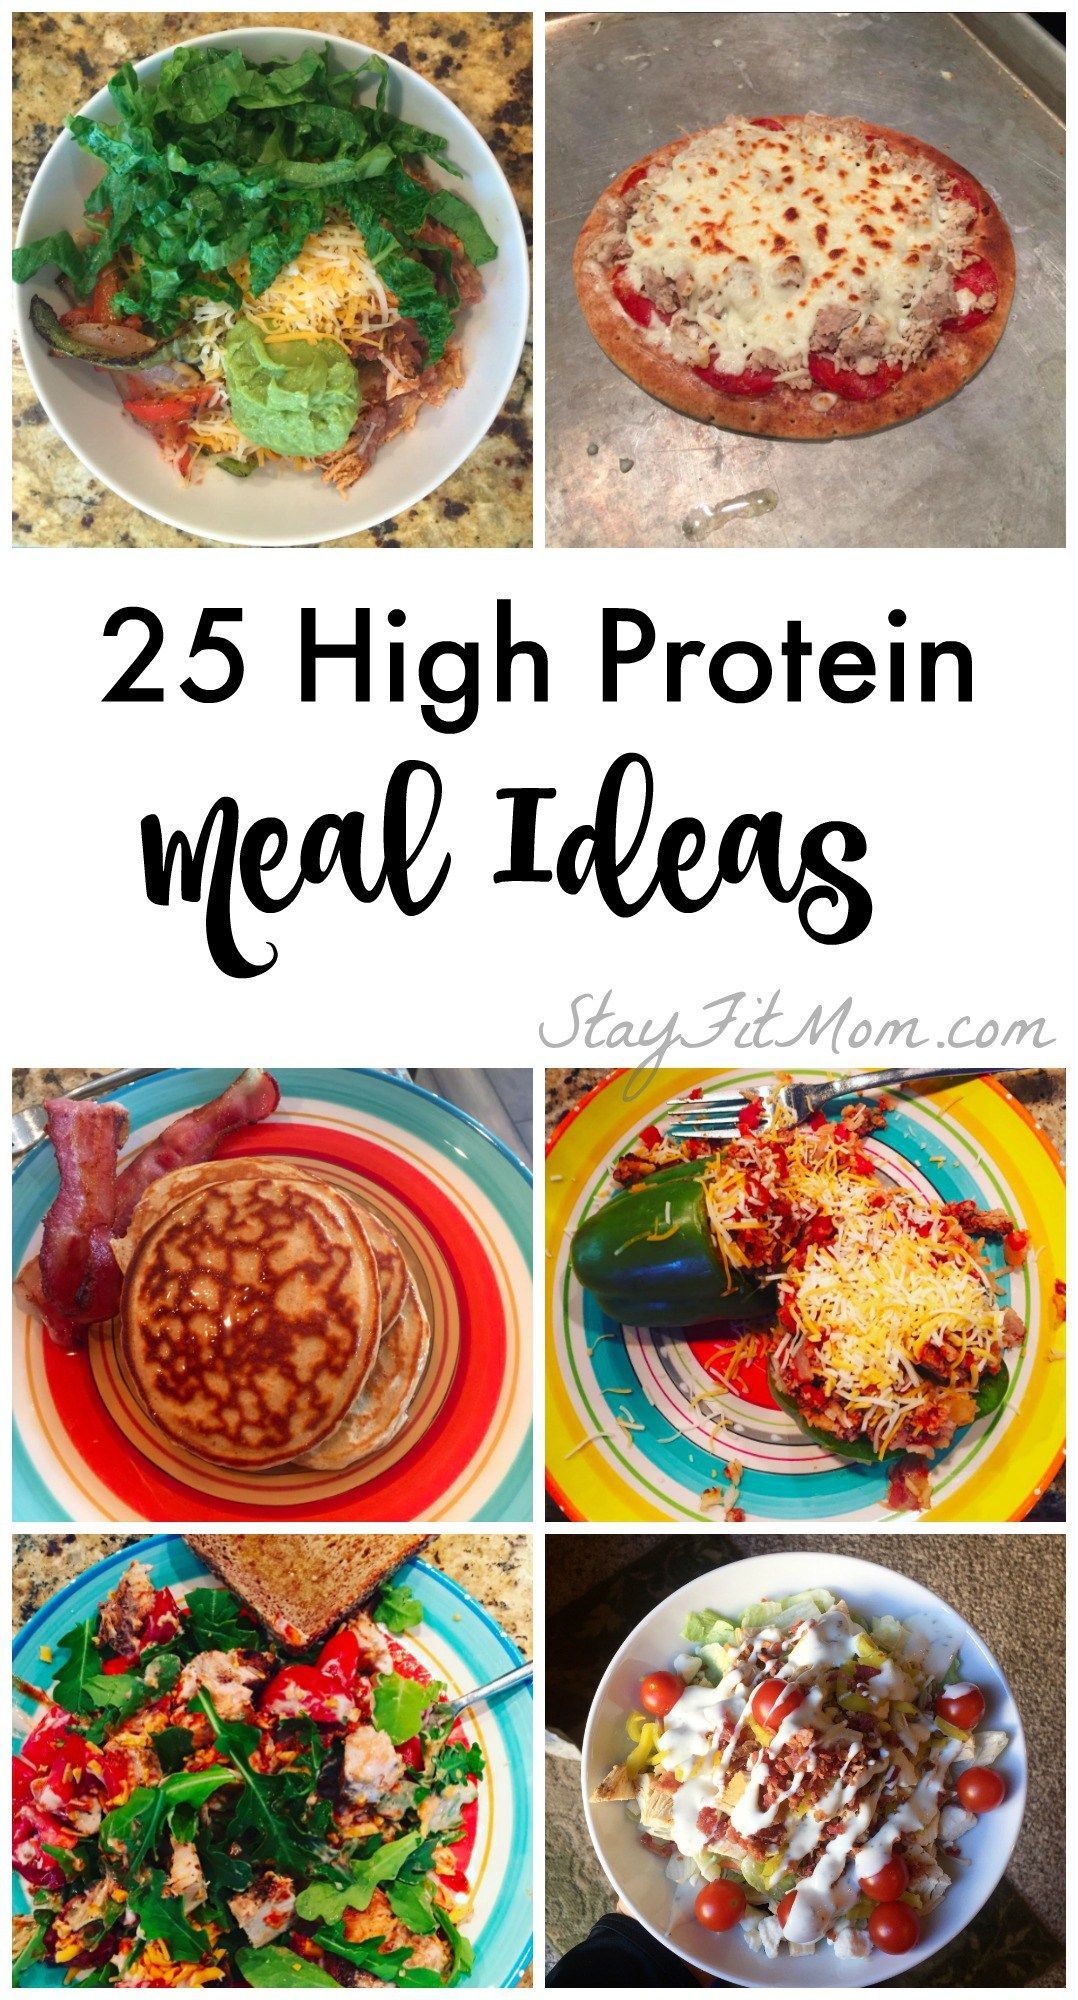 Stay Fit Mom makes Macro Counting so easy with so many ideas for high protein meals.